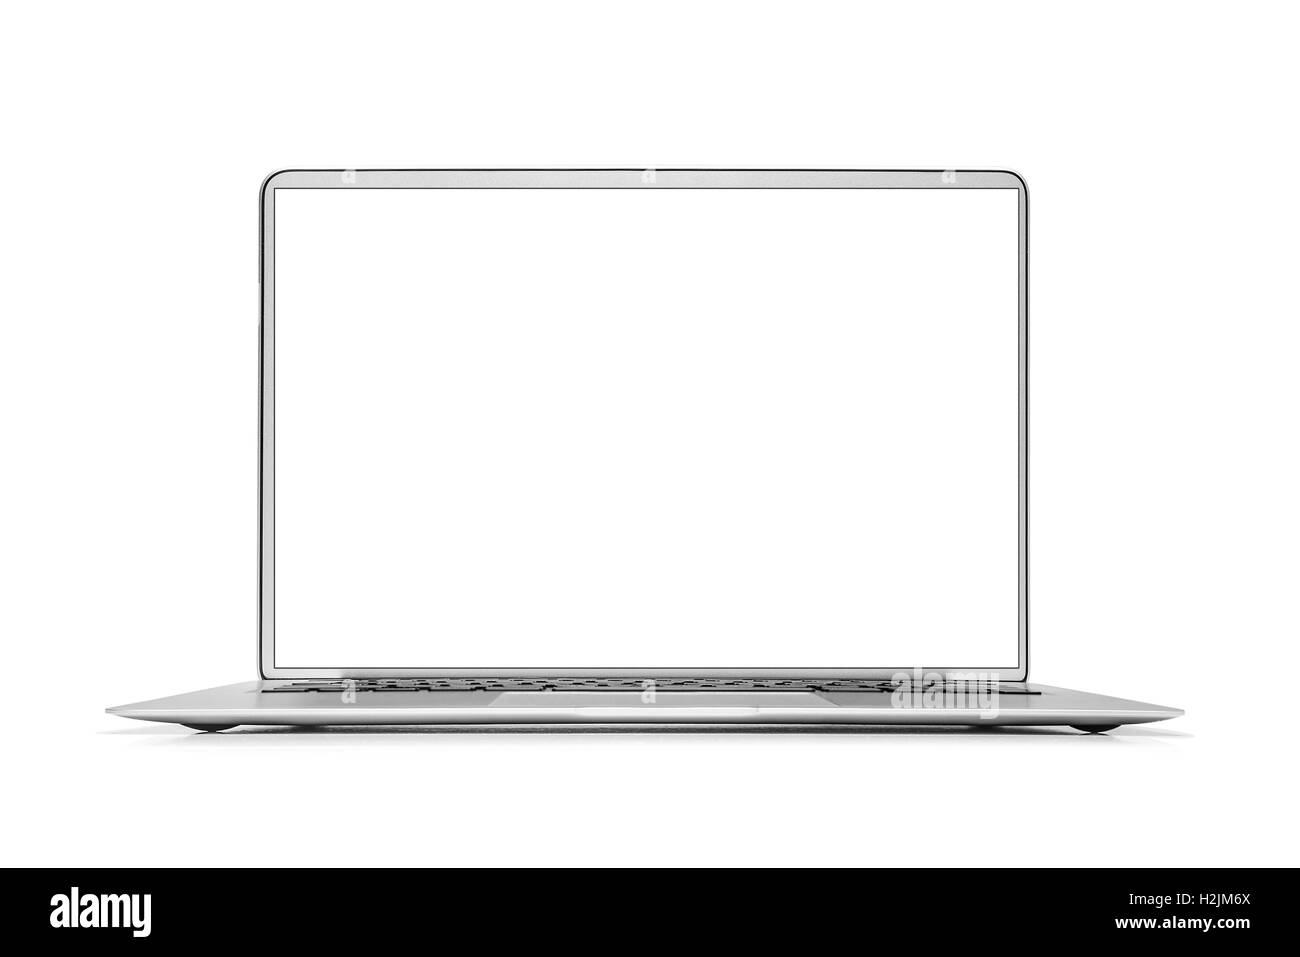 Silver laptop isolated on white background with clipping path. Stock Photo